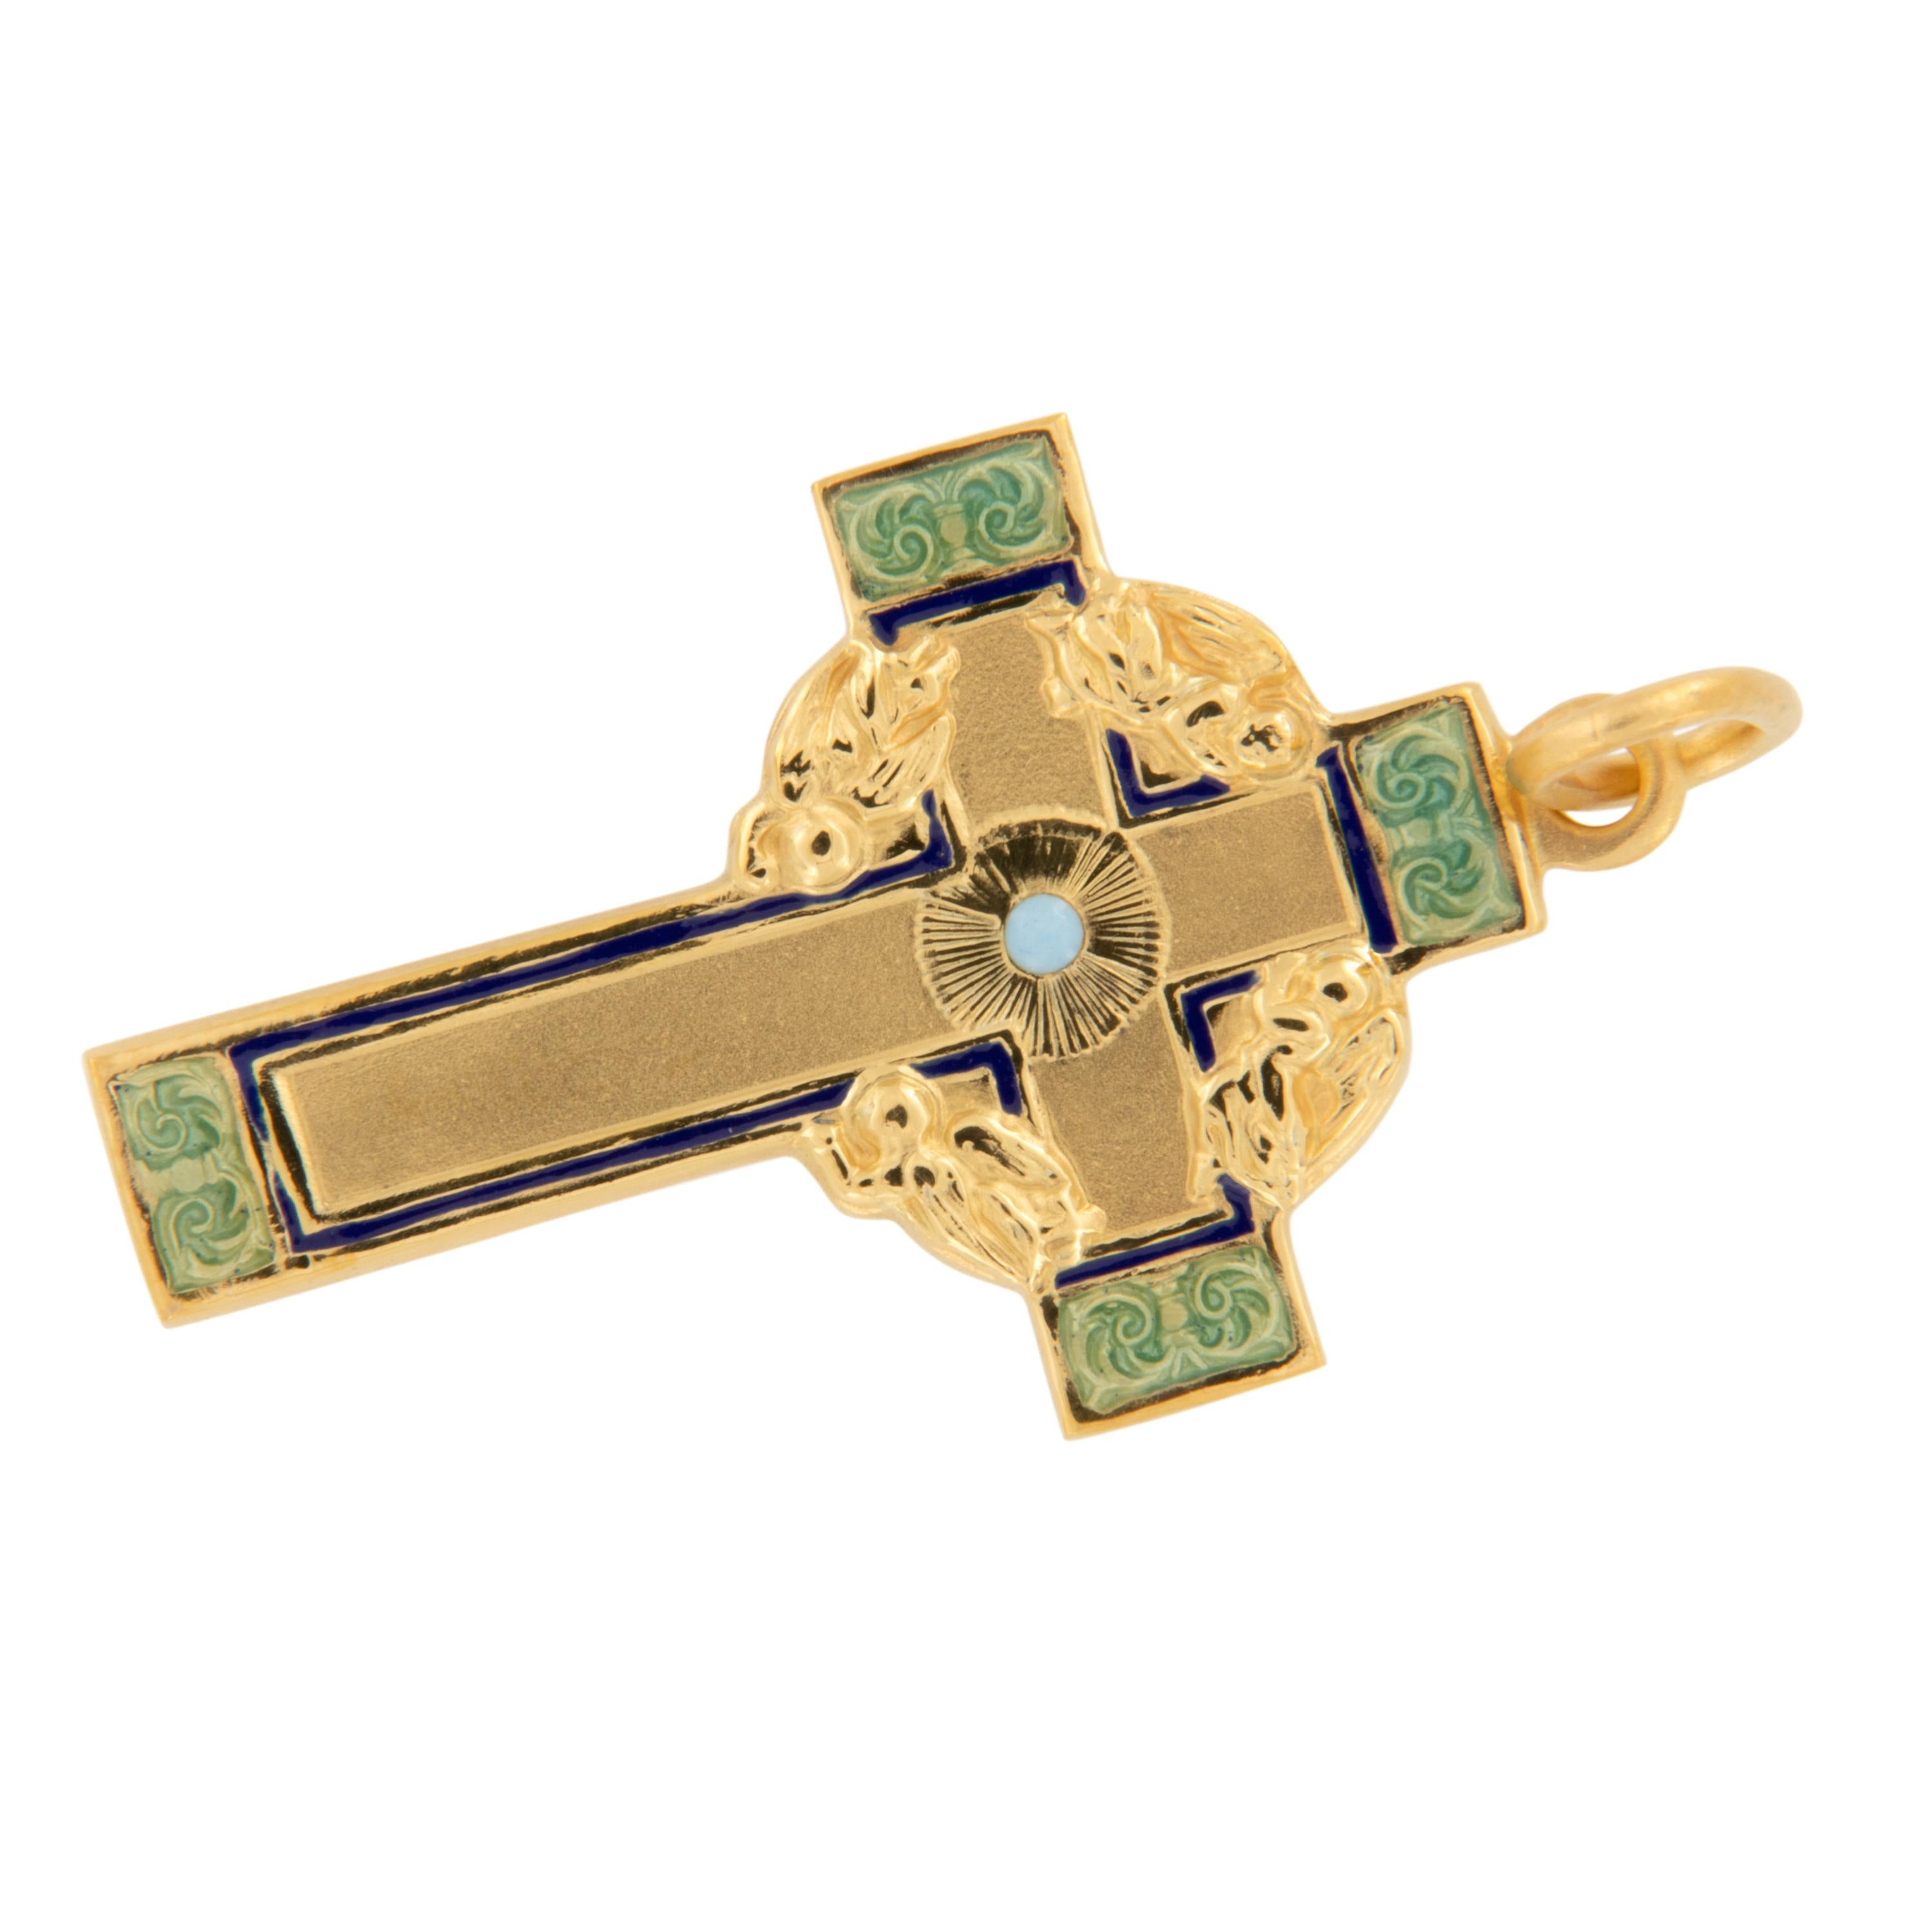 Masriera 18 Karat Yellow Gold and Enamel Cross In New Condition For Sale In Troy, MI